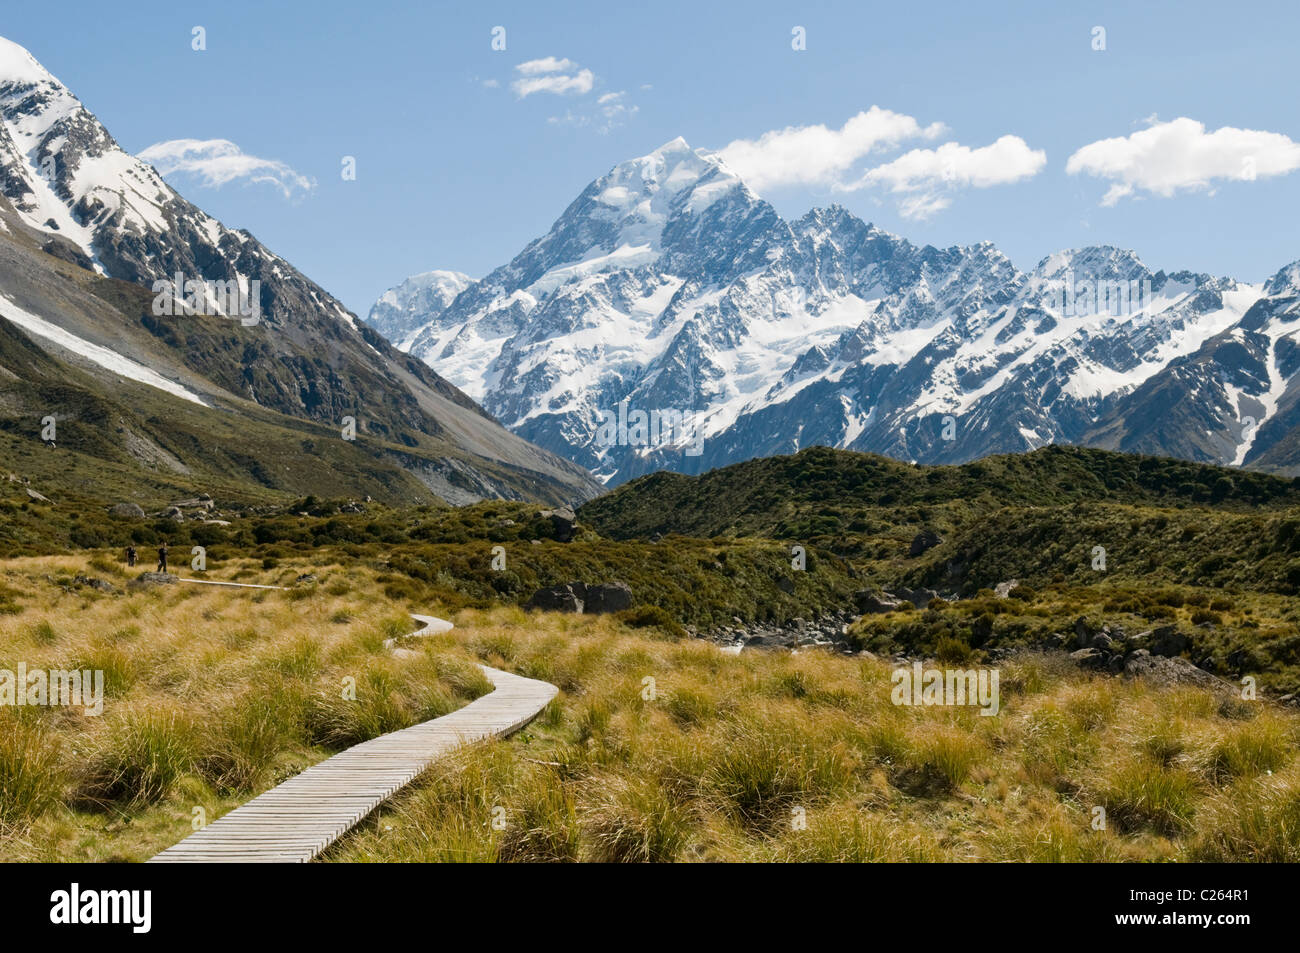 Baordwalk through the Hooker Valley, Mt Cook in the background, South Island of New Zealand Stock Photo